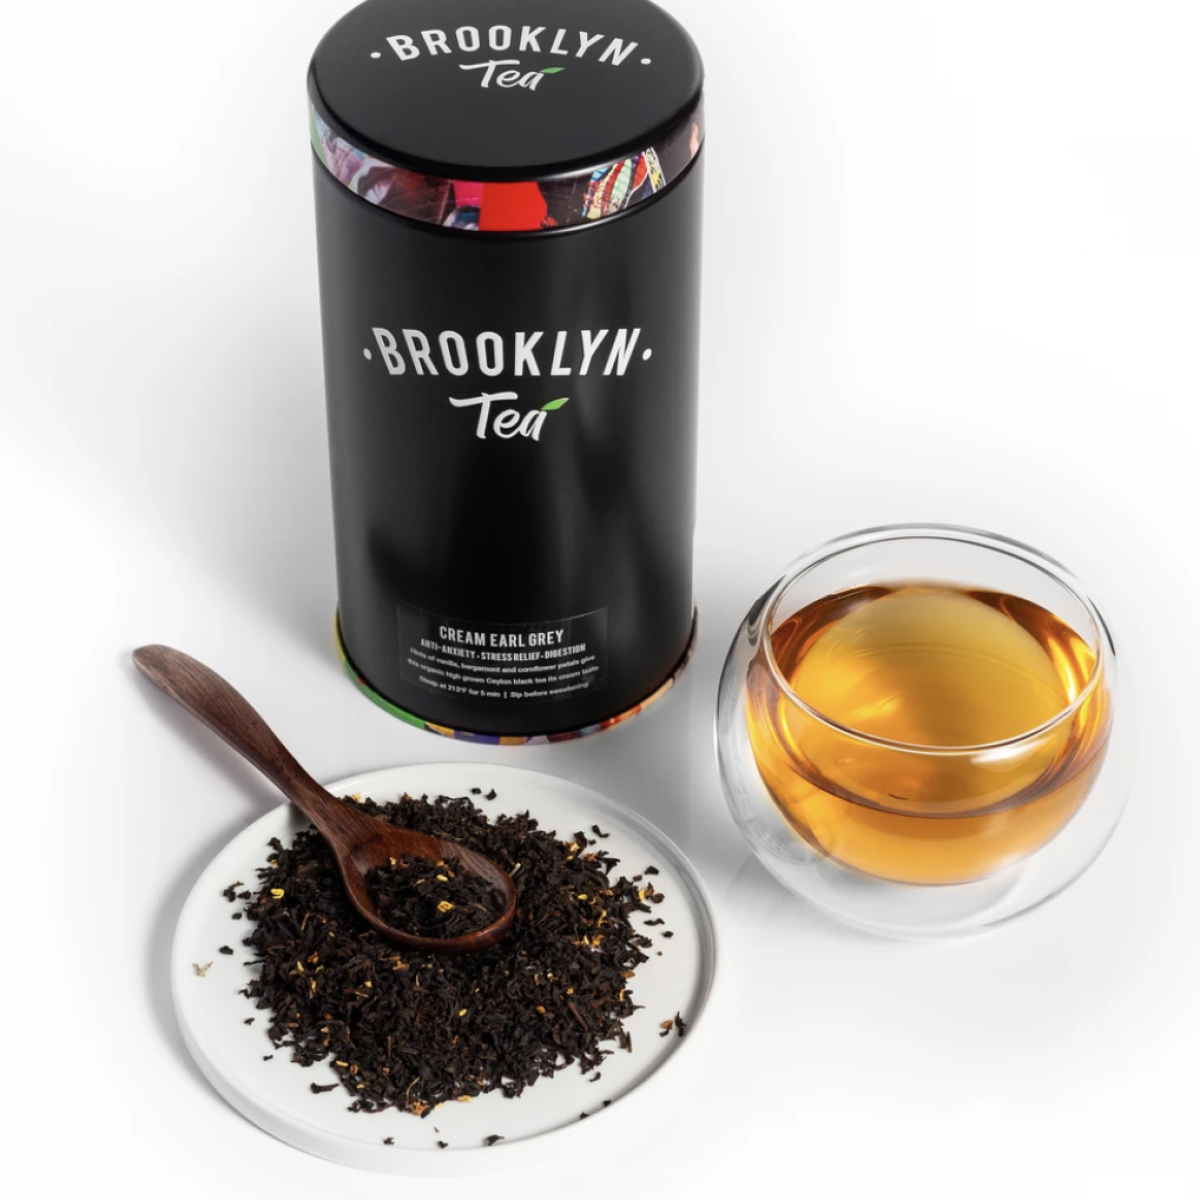 Warm Up Your Holiday Shopping List With A Gift From Brooklyn Tea